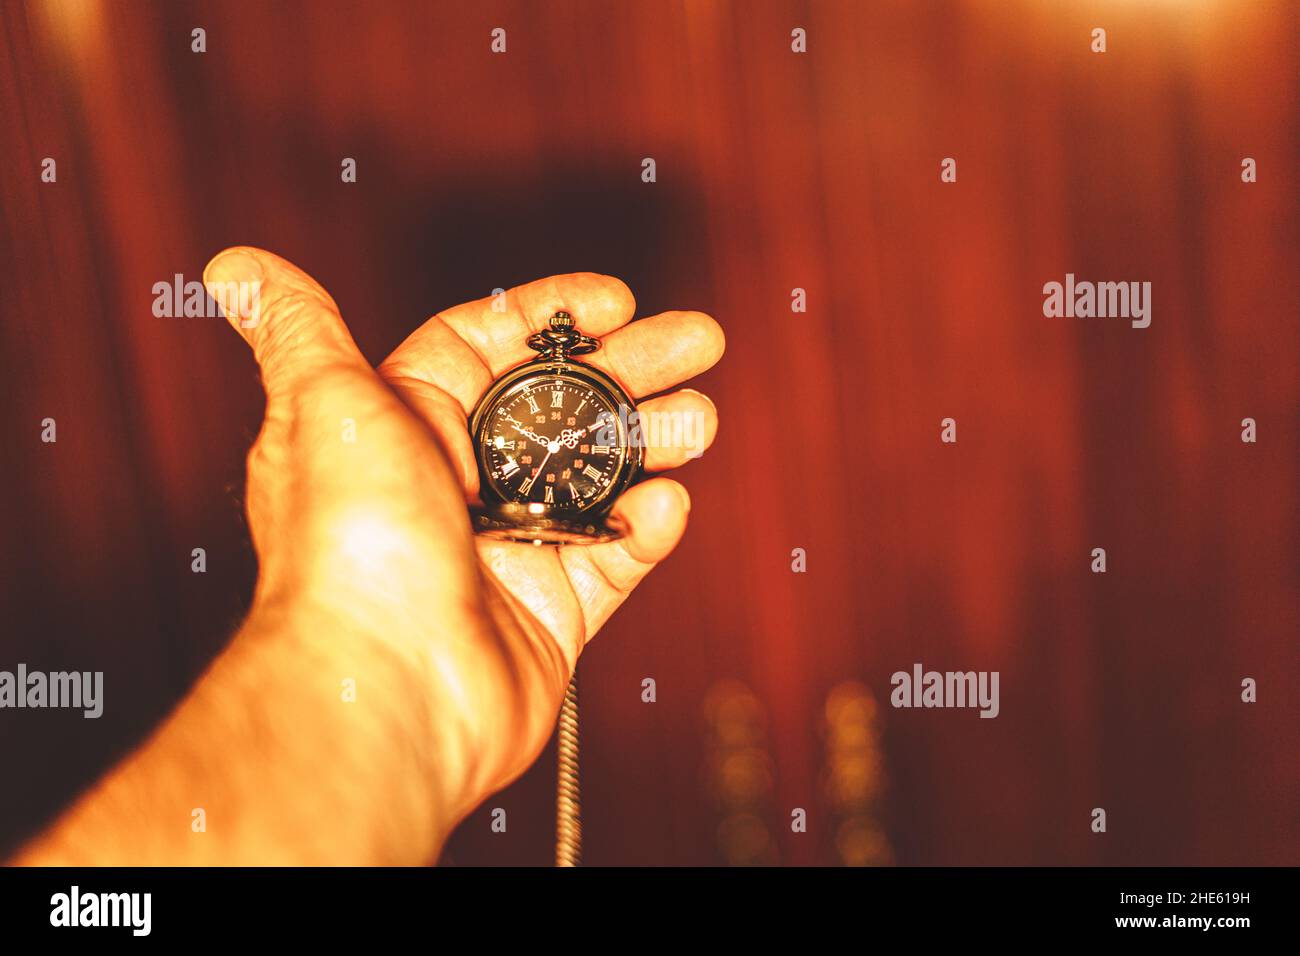 hand showing a watch Stock Photo